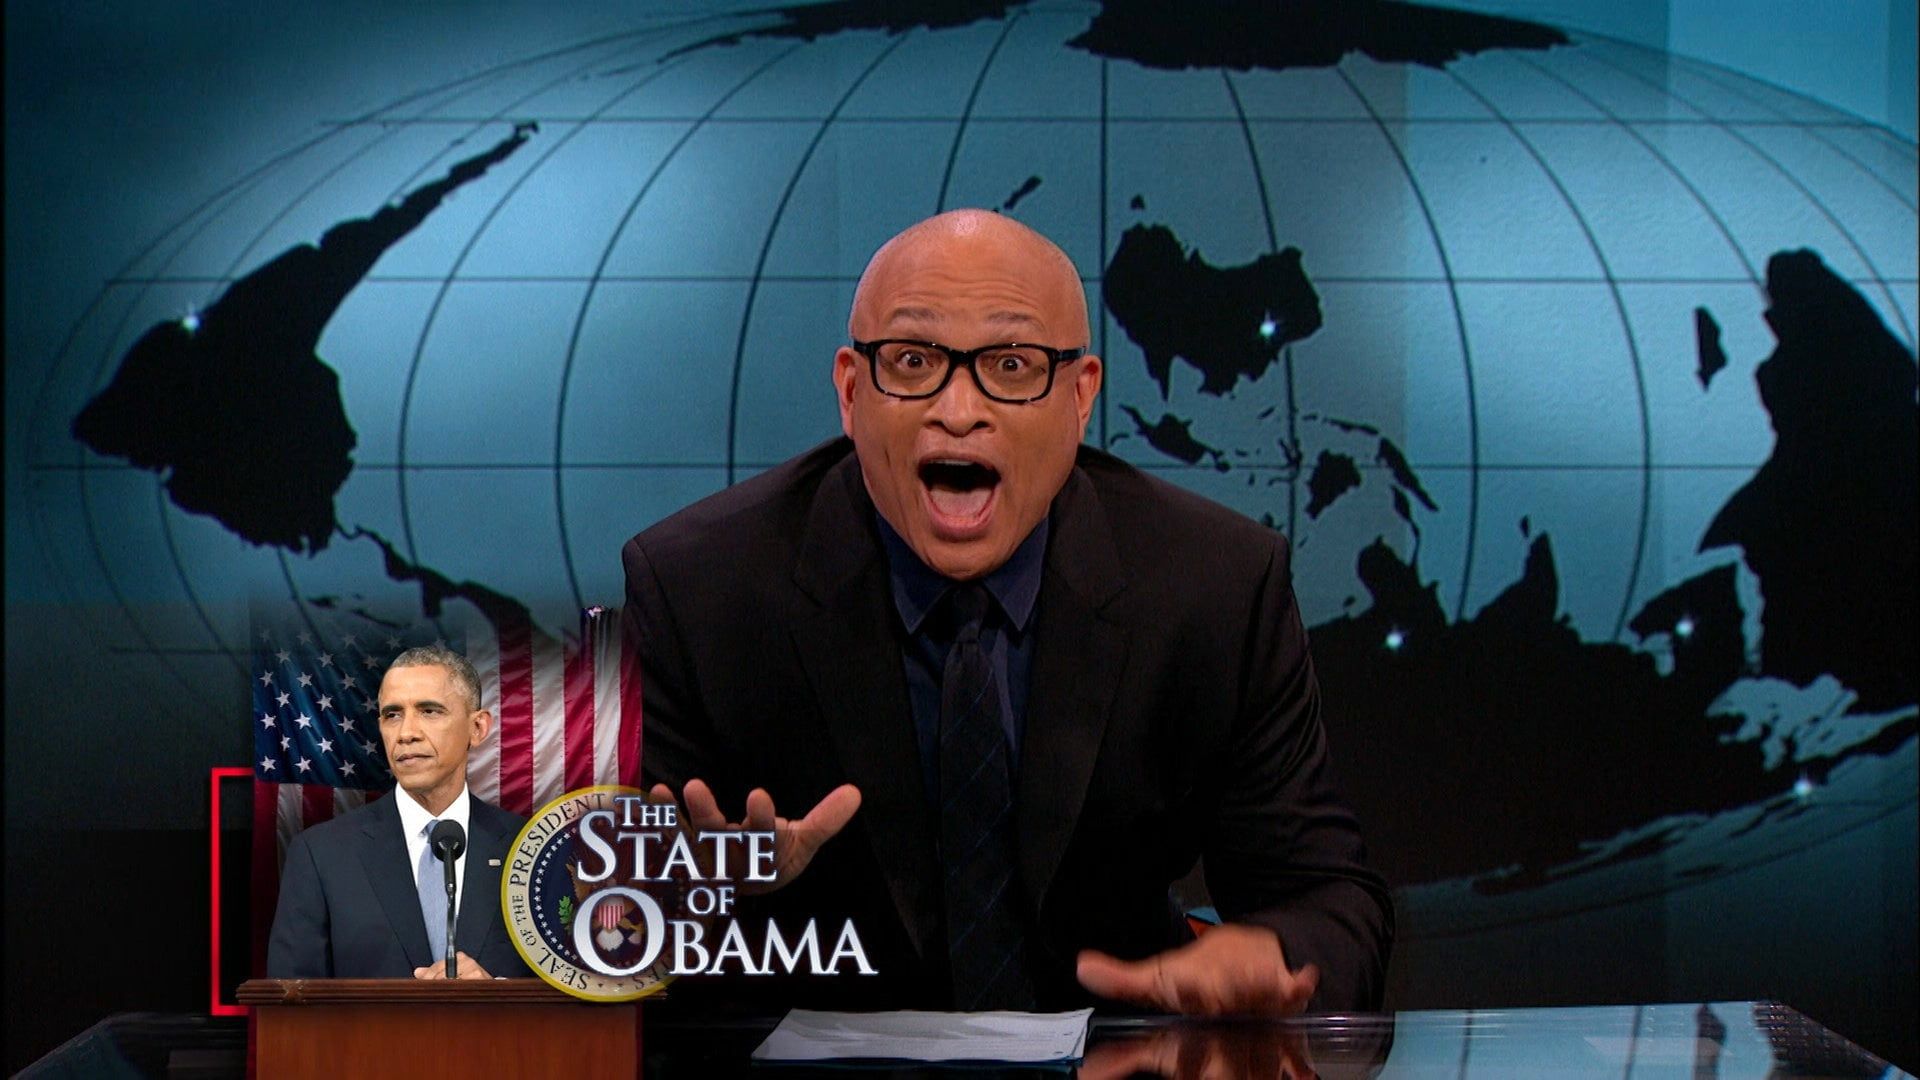 The Nightly Show with Larry Wilmore background